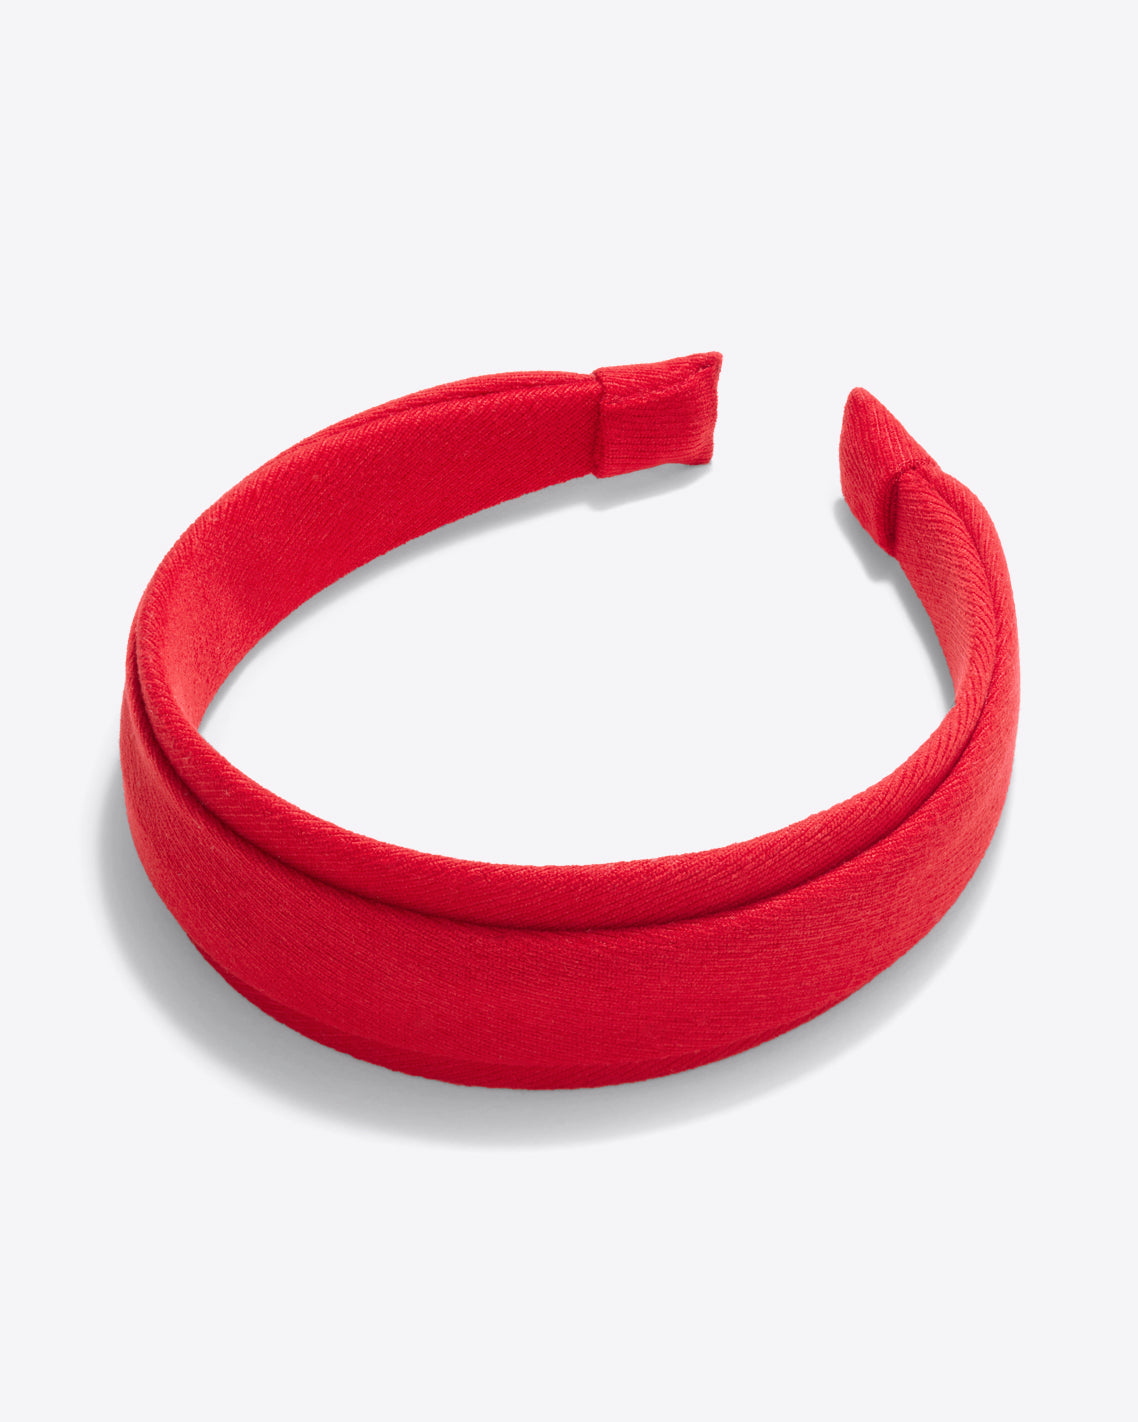 Pleated Headband in Red